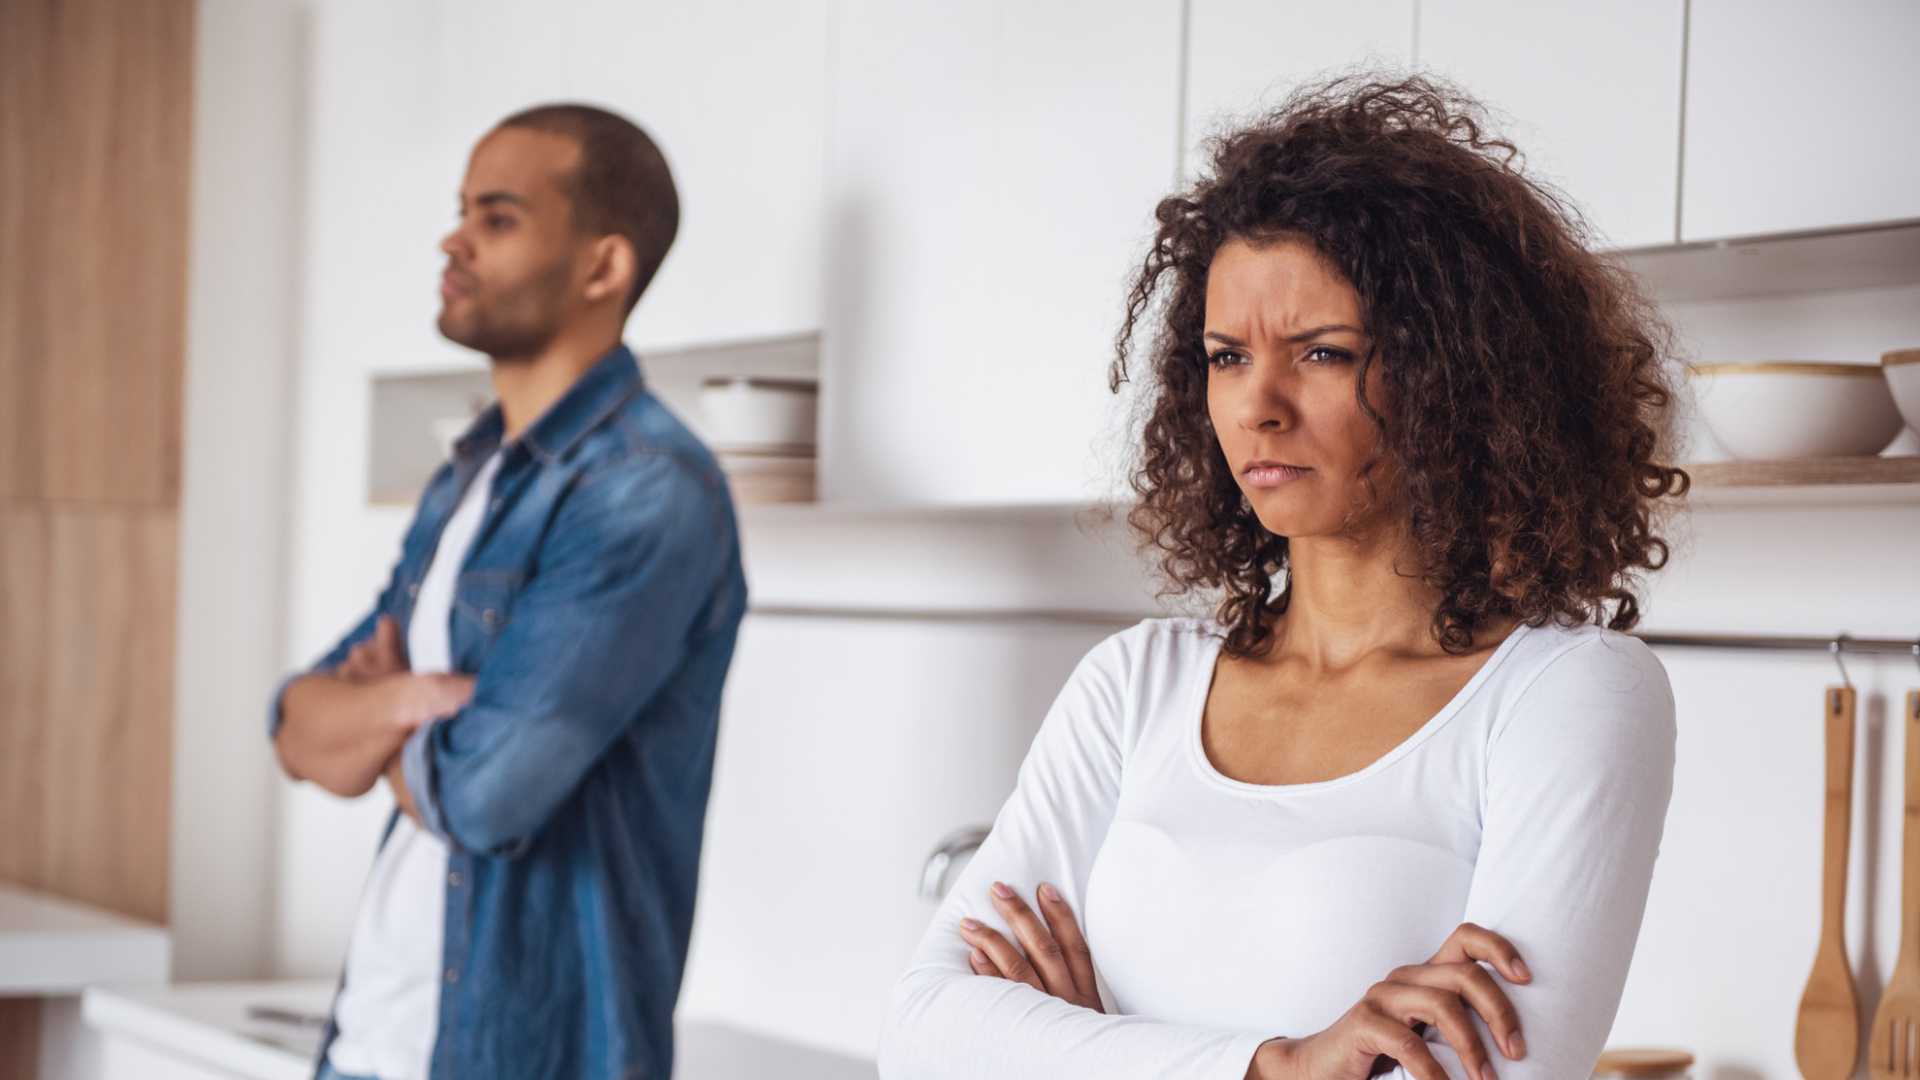 finding freedom what to do when your spouse denies your right to leave an abusive marriage